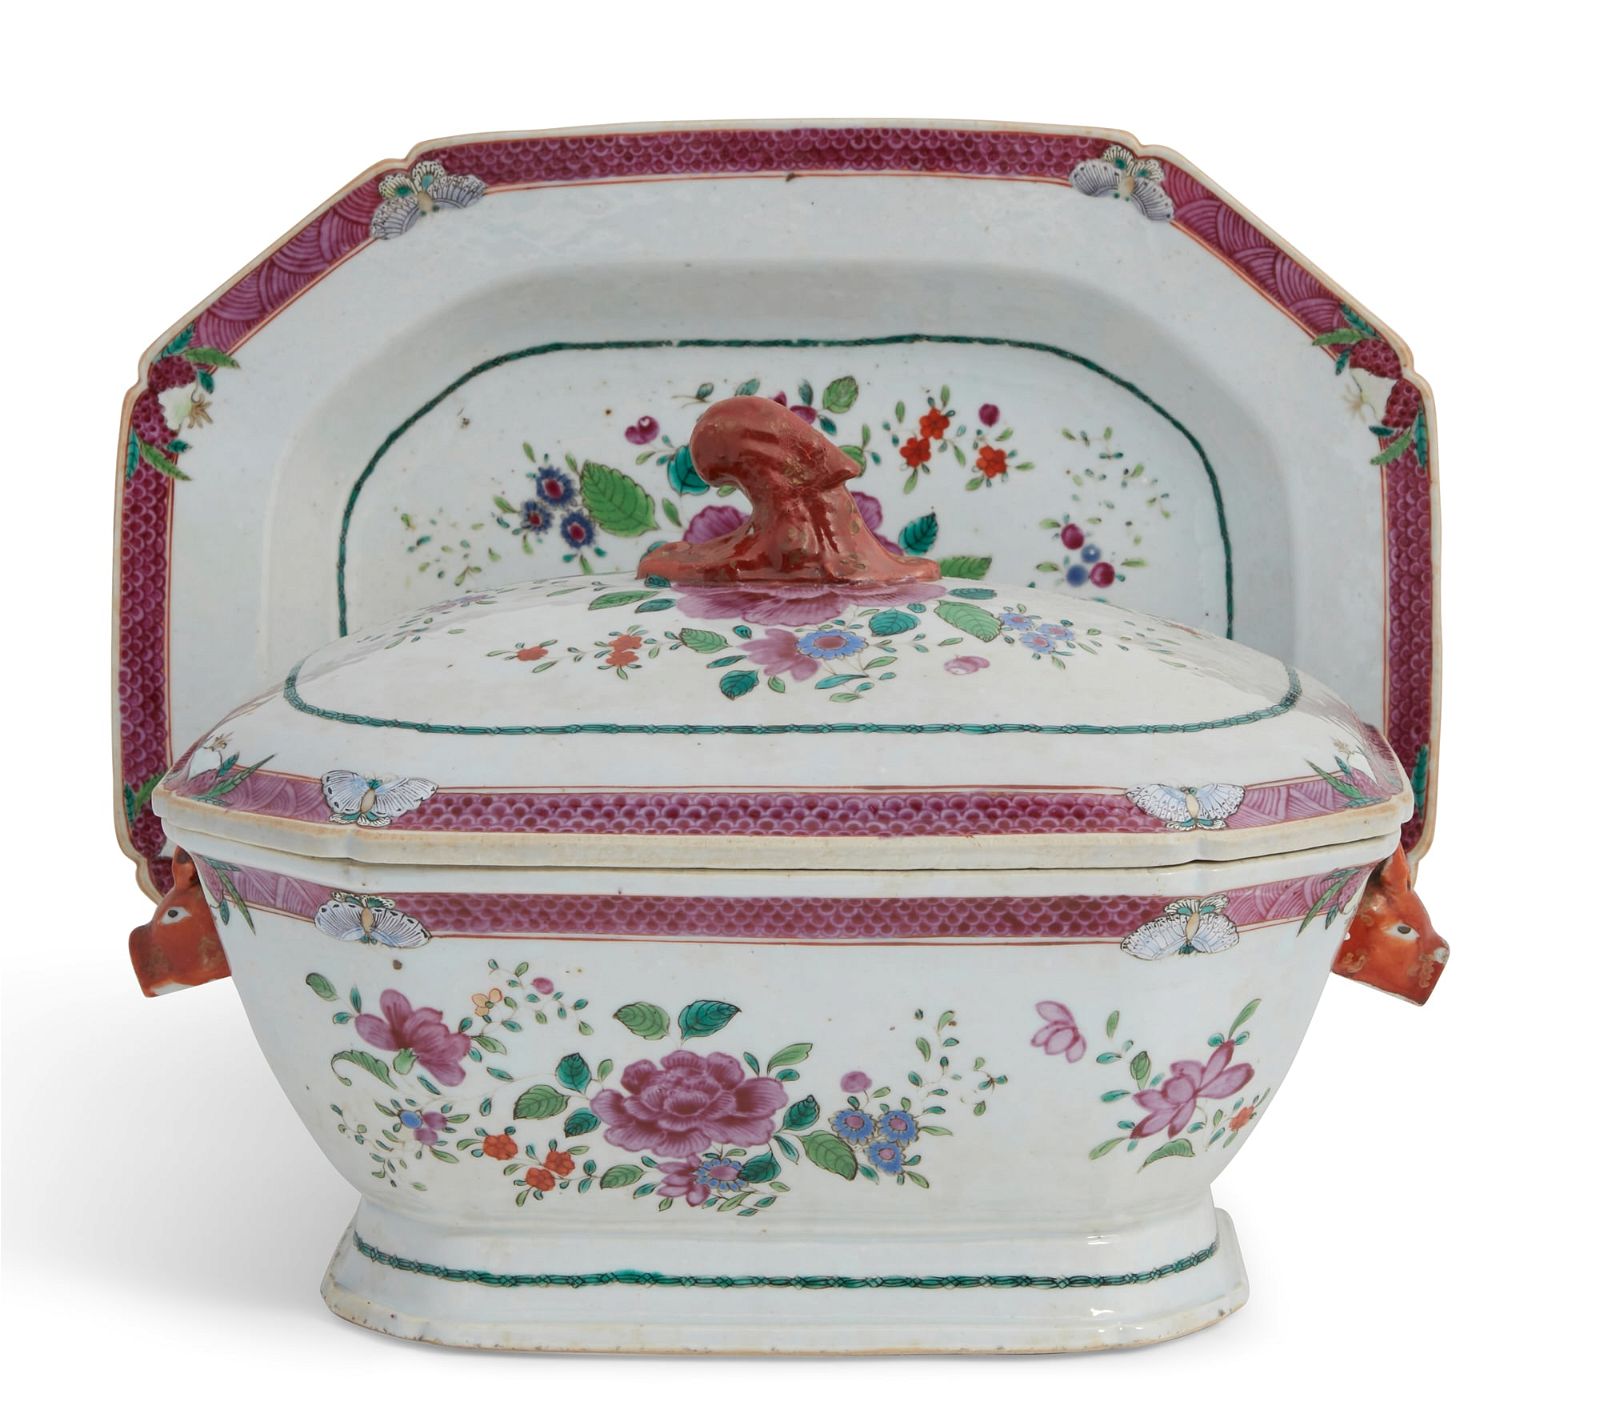 A CHINESE EXPORT PORCELAIN TUREEN